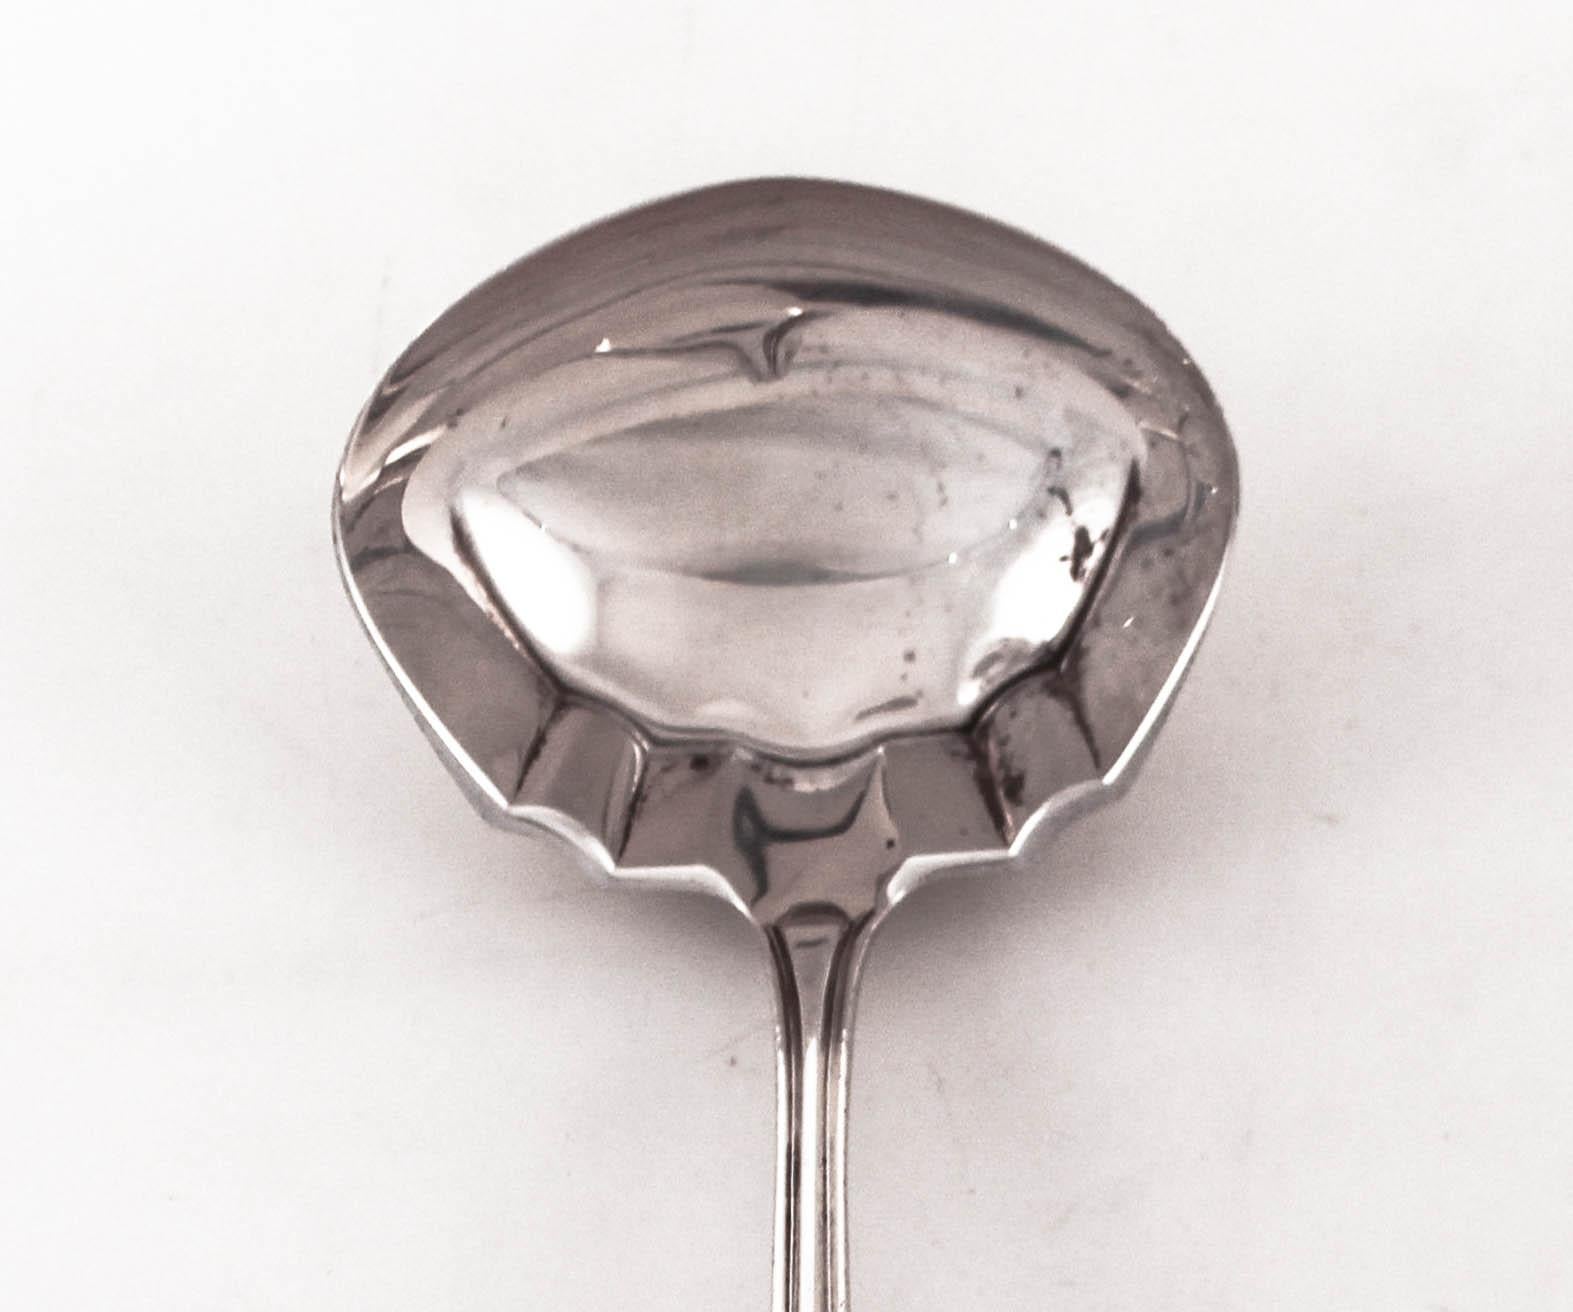 Being offered is a sterling silver gravy ladle in the “Hamilton Engraved” pattern by the Alvin Silver Company, circa 1910. It has some etching on the very top of the handle; garlands and a script letter S. With Thanksgiving Day around the corner,